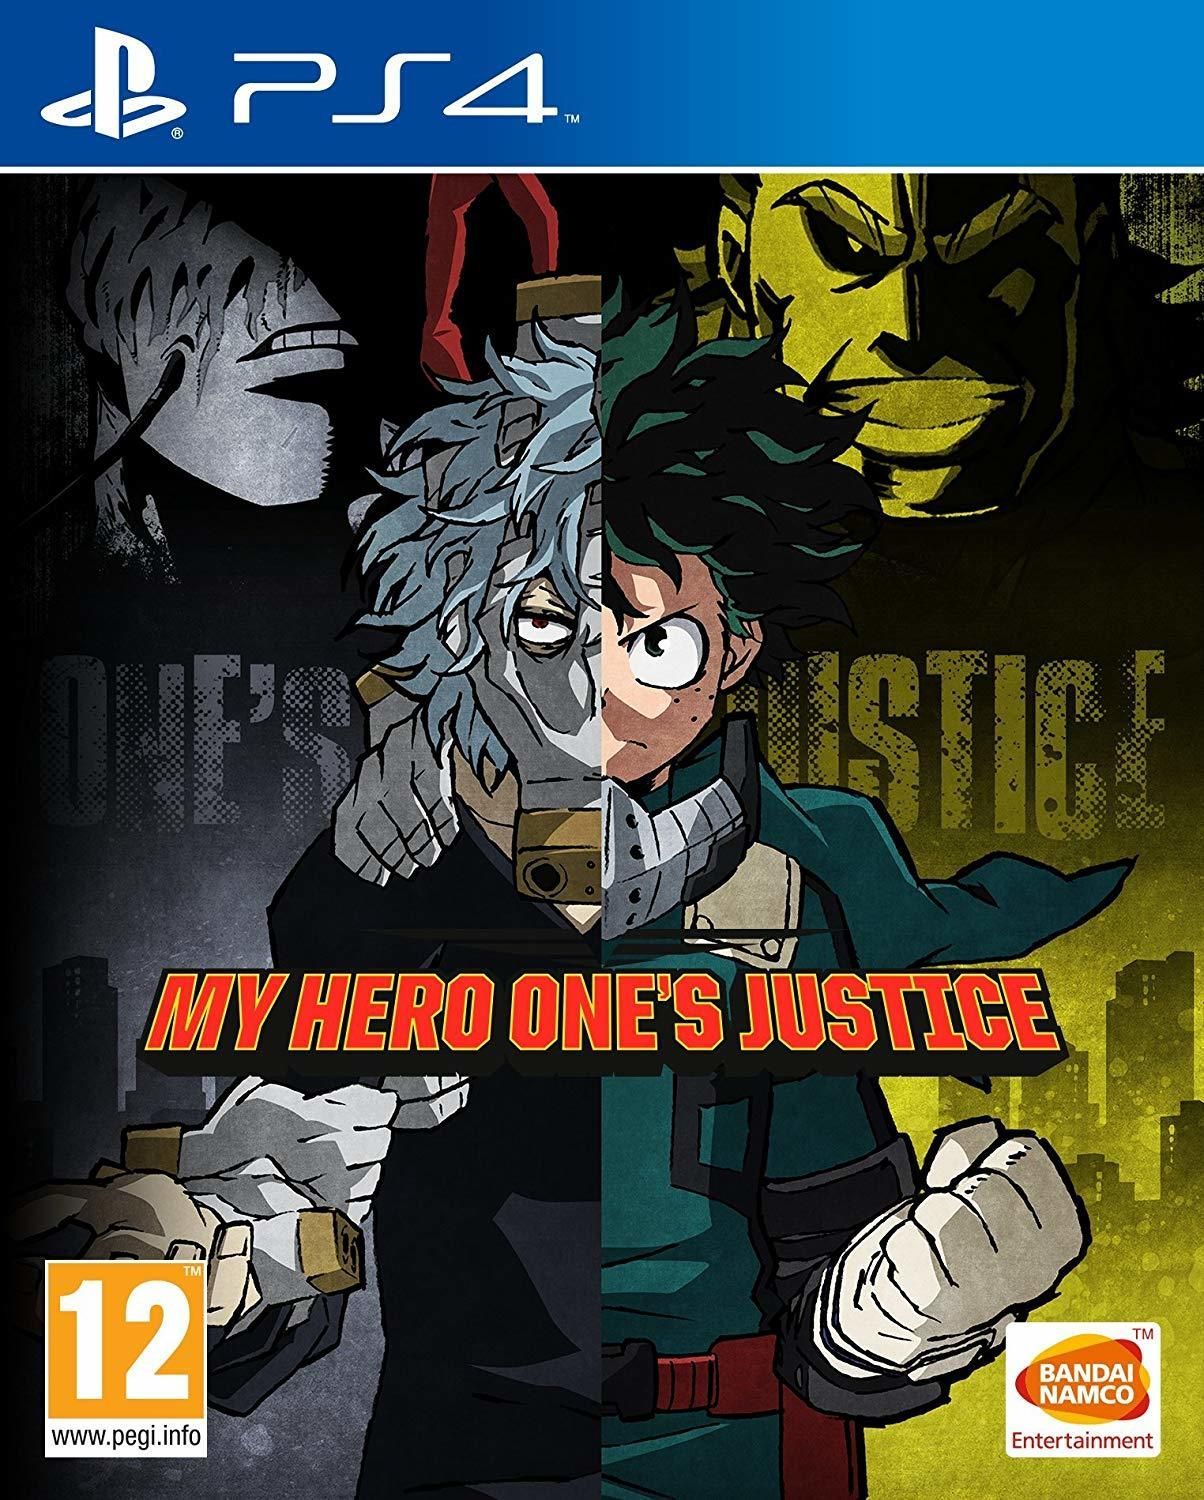 My Hero One's Justice PS4. Xbox one games, Xbox one, My hero